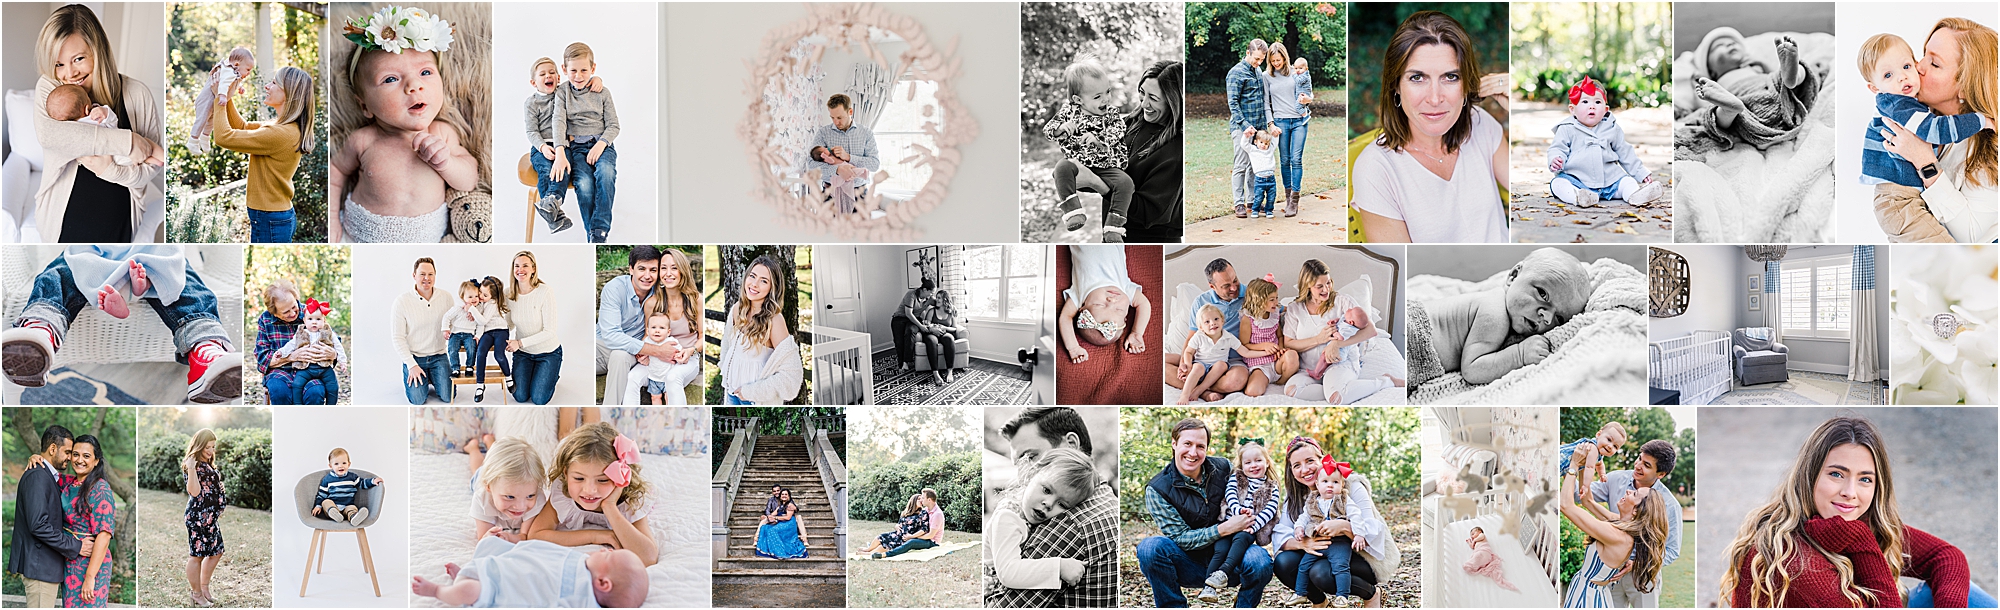 Katherine Jianas Photography 2019 in review